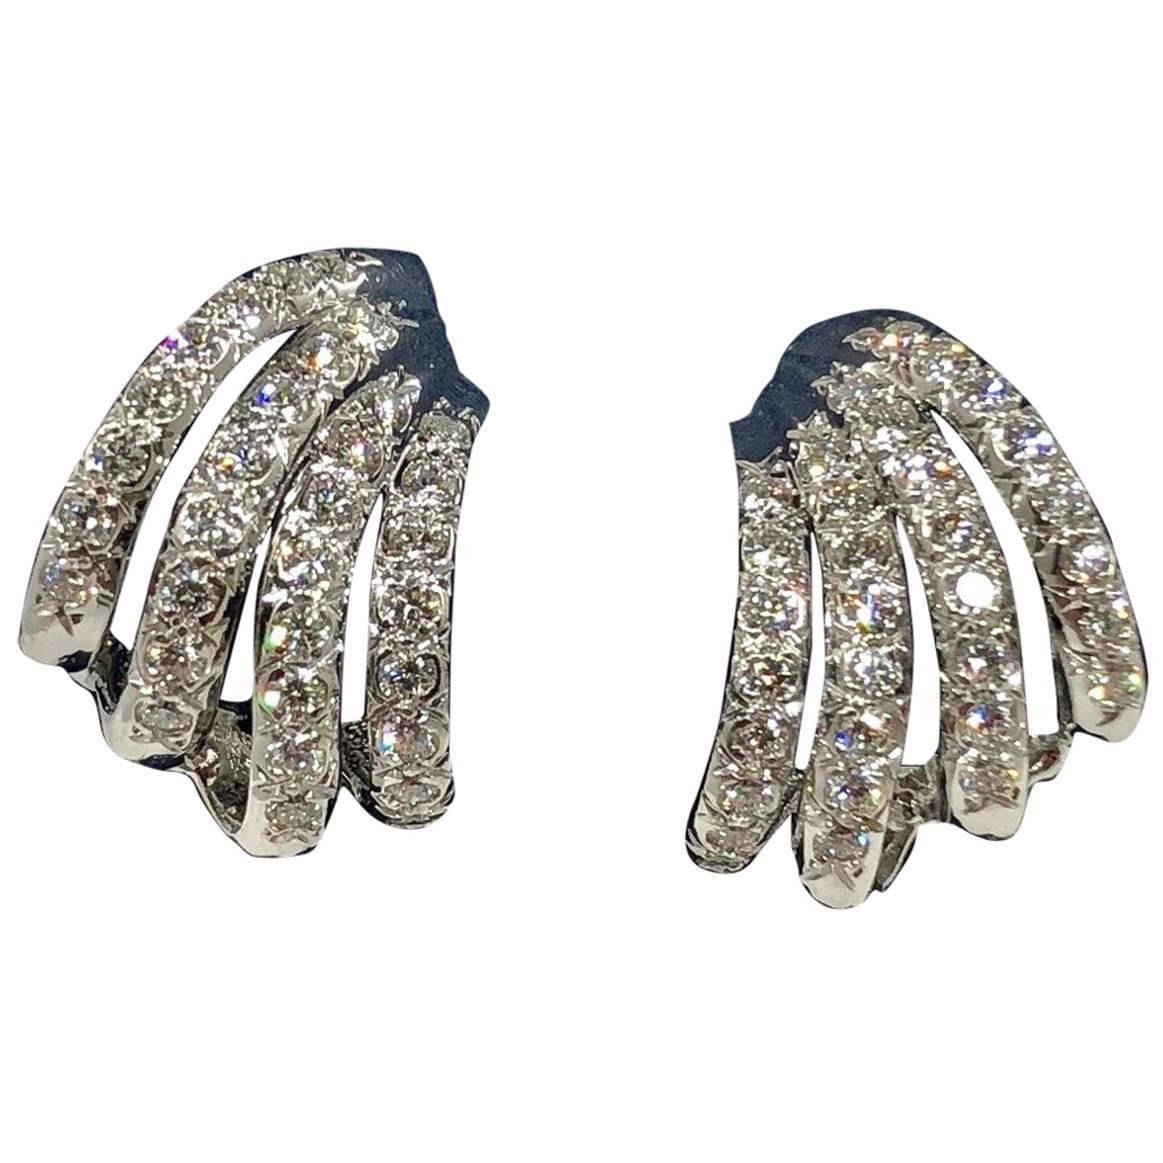 Henry Dankner and Sons 18 karat white gold and diamond climber earrings. Created by Henry Dankner & Sons, this stunning pair of earrings are designed with 64- full cut round diamonds equaling 1.50 carat approximate total weight, average color G-H,